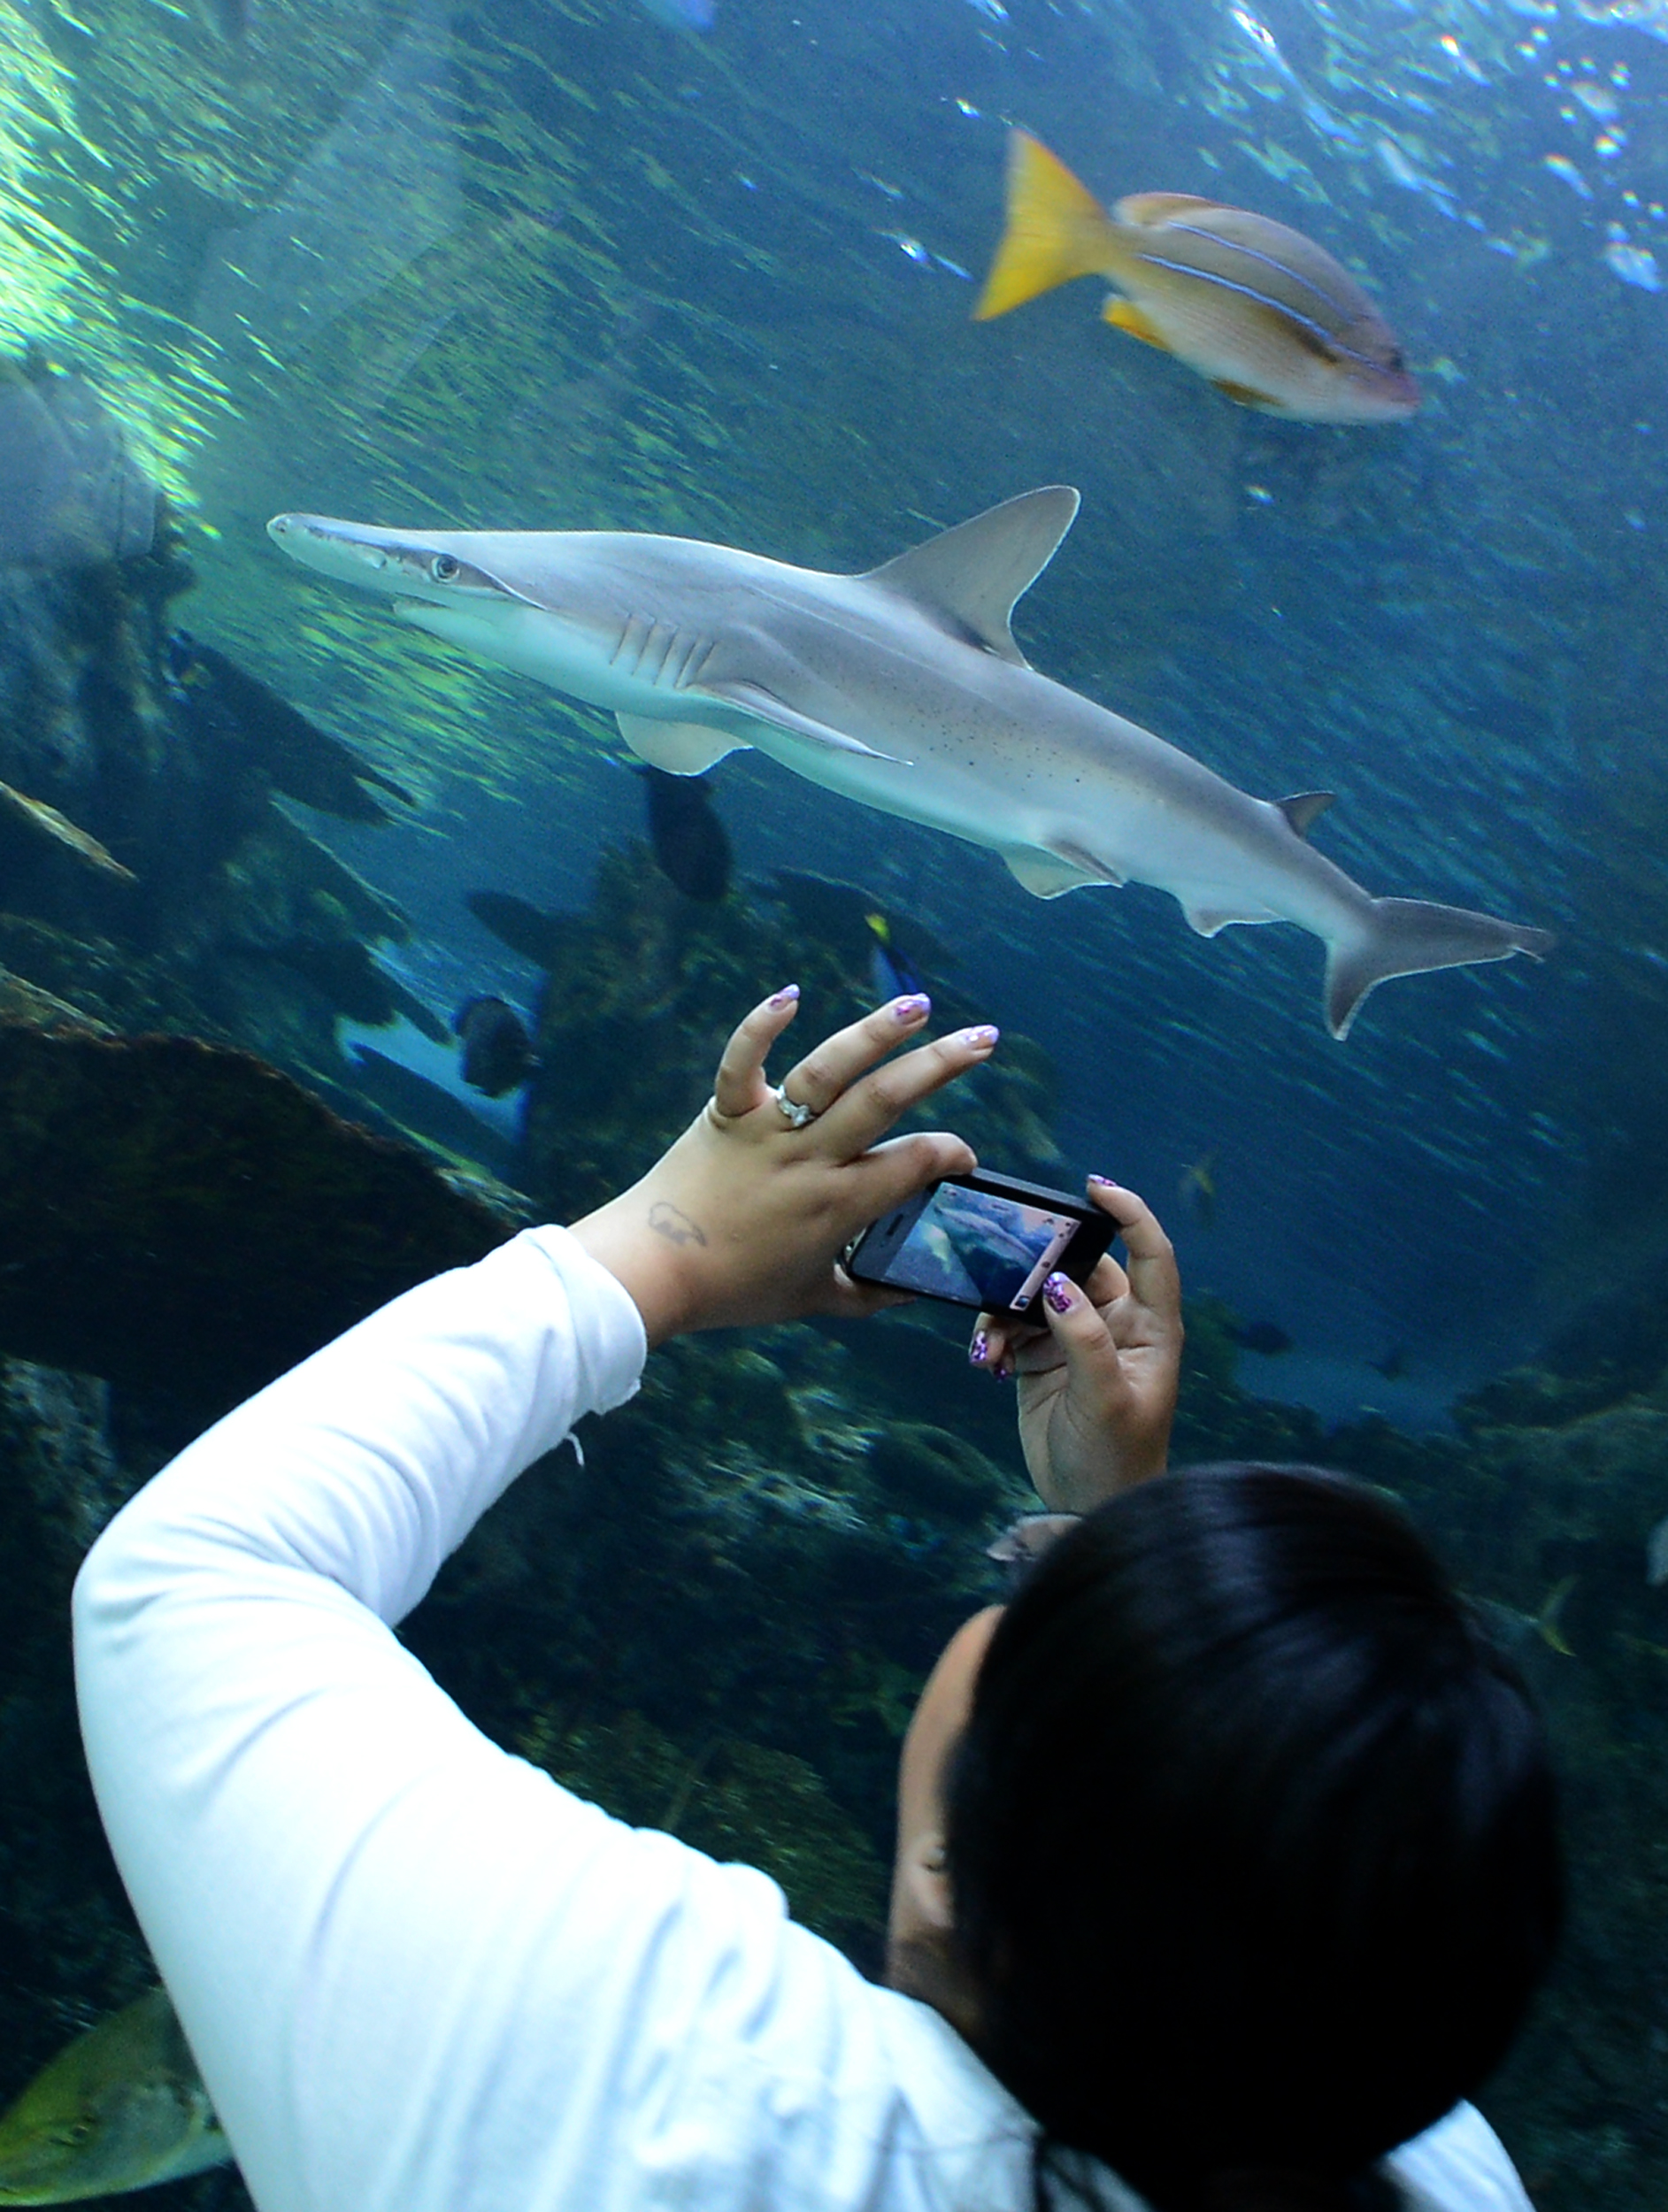 (FILES) This file photo taken on April 26, 2012 shows a visitor taking pictures a Whitetip Reef shark at the Aquarium of the Pacific in Long Beach, California. In California, a shark fin that moves through the surface of the water is not just reminiscent of "Jaws," the presence of these predators is at a record level from the past thirty years near the shores of Los Angeles. / AFP PHOTO / JOE KLAMAR / TO GO WITH AFP STORY by Véronique DUPONT, US-animal-environment-tourism-ocean